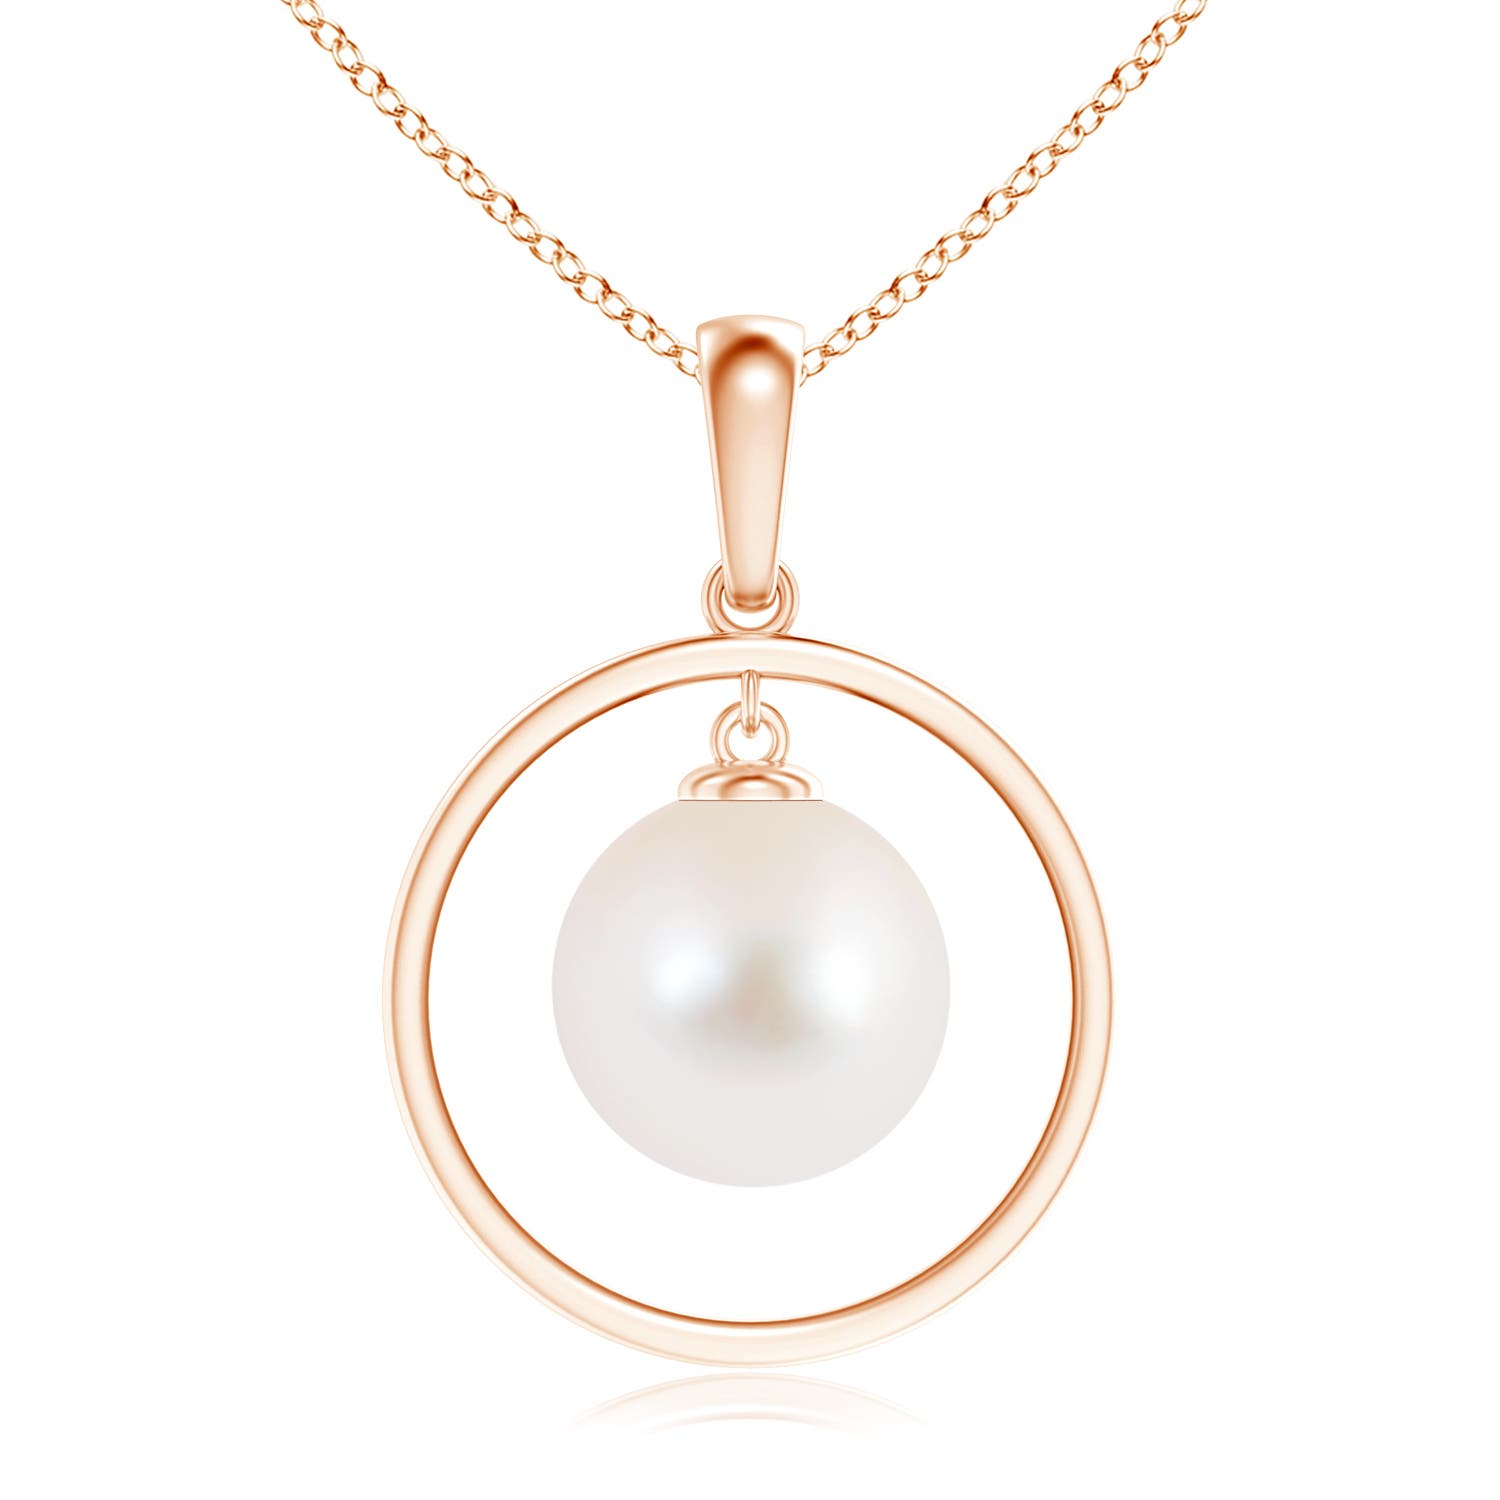 AAA - Freshwater Cultured Pearl / 7.2 CT / 14 KT Rose Gold